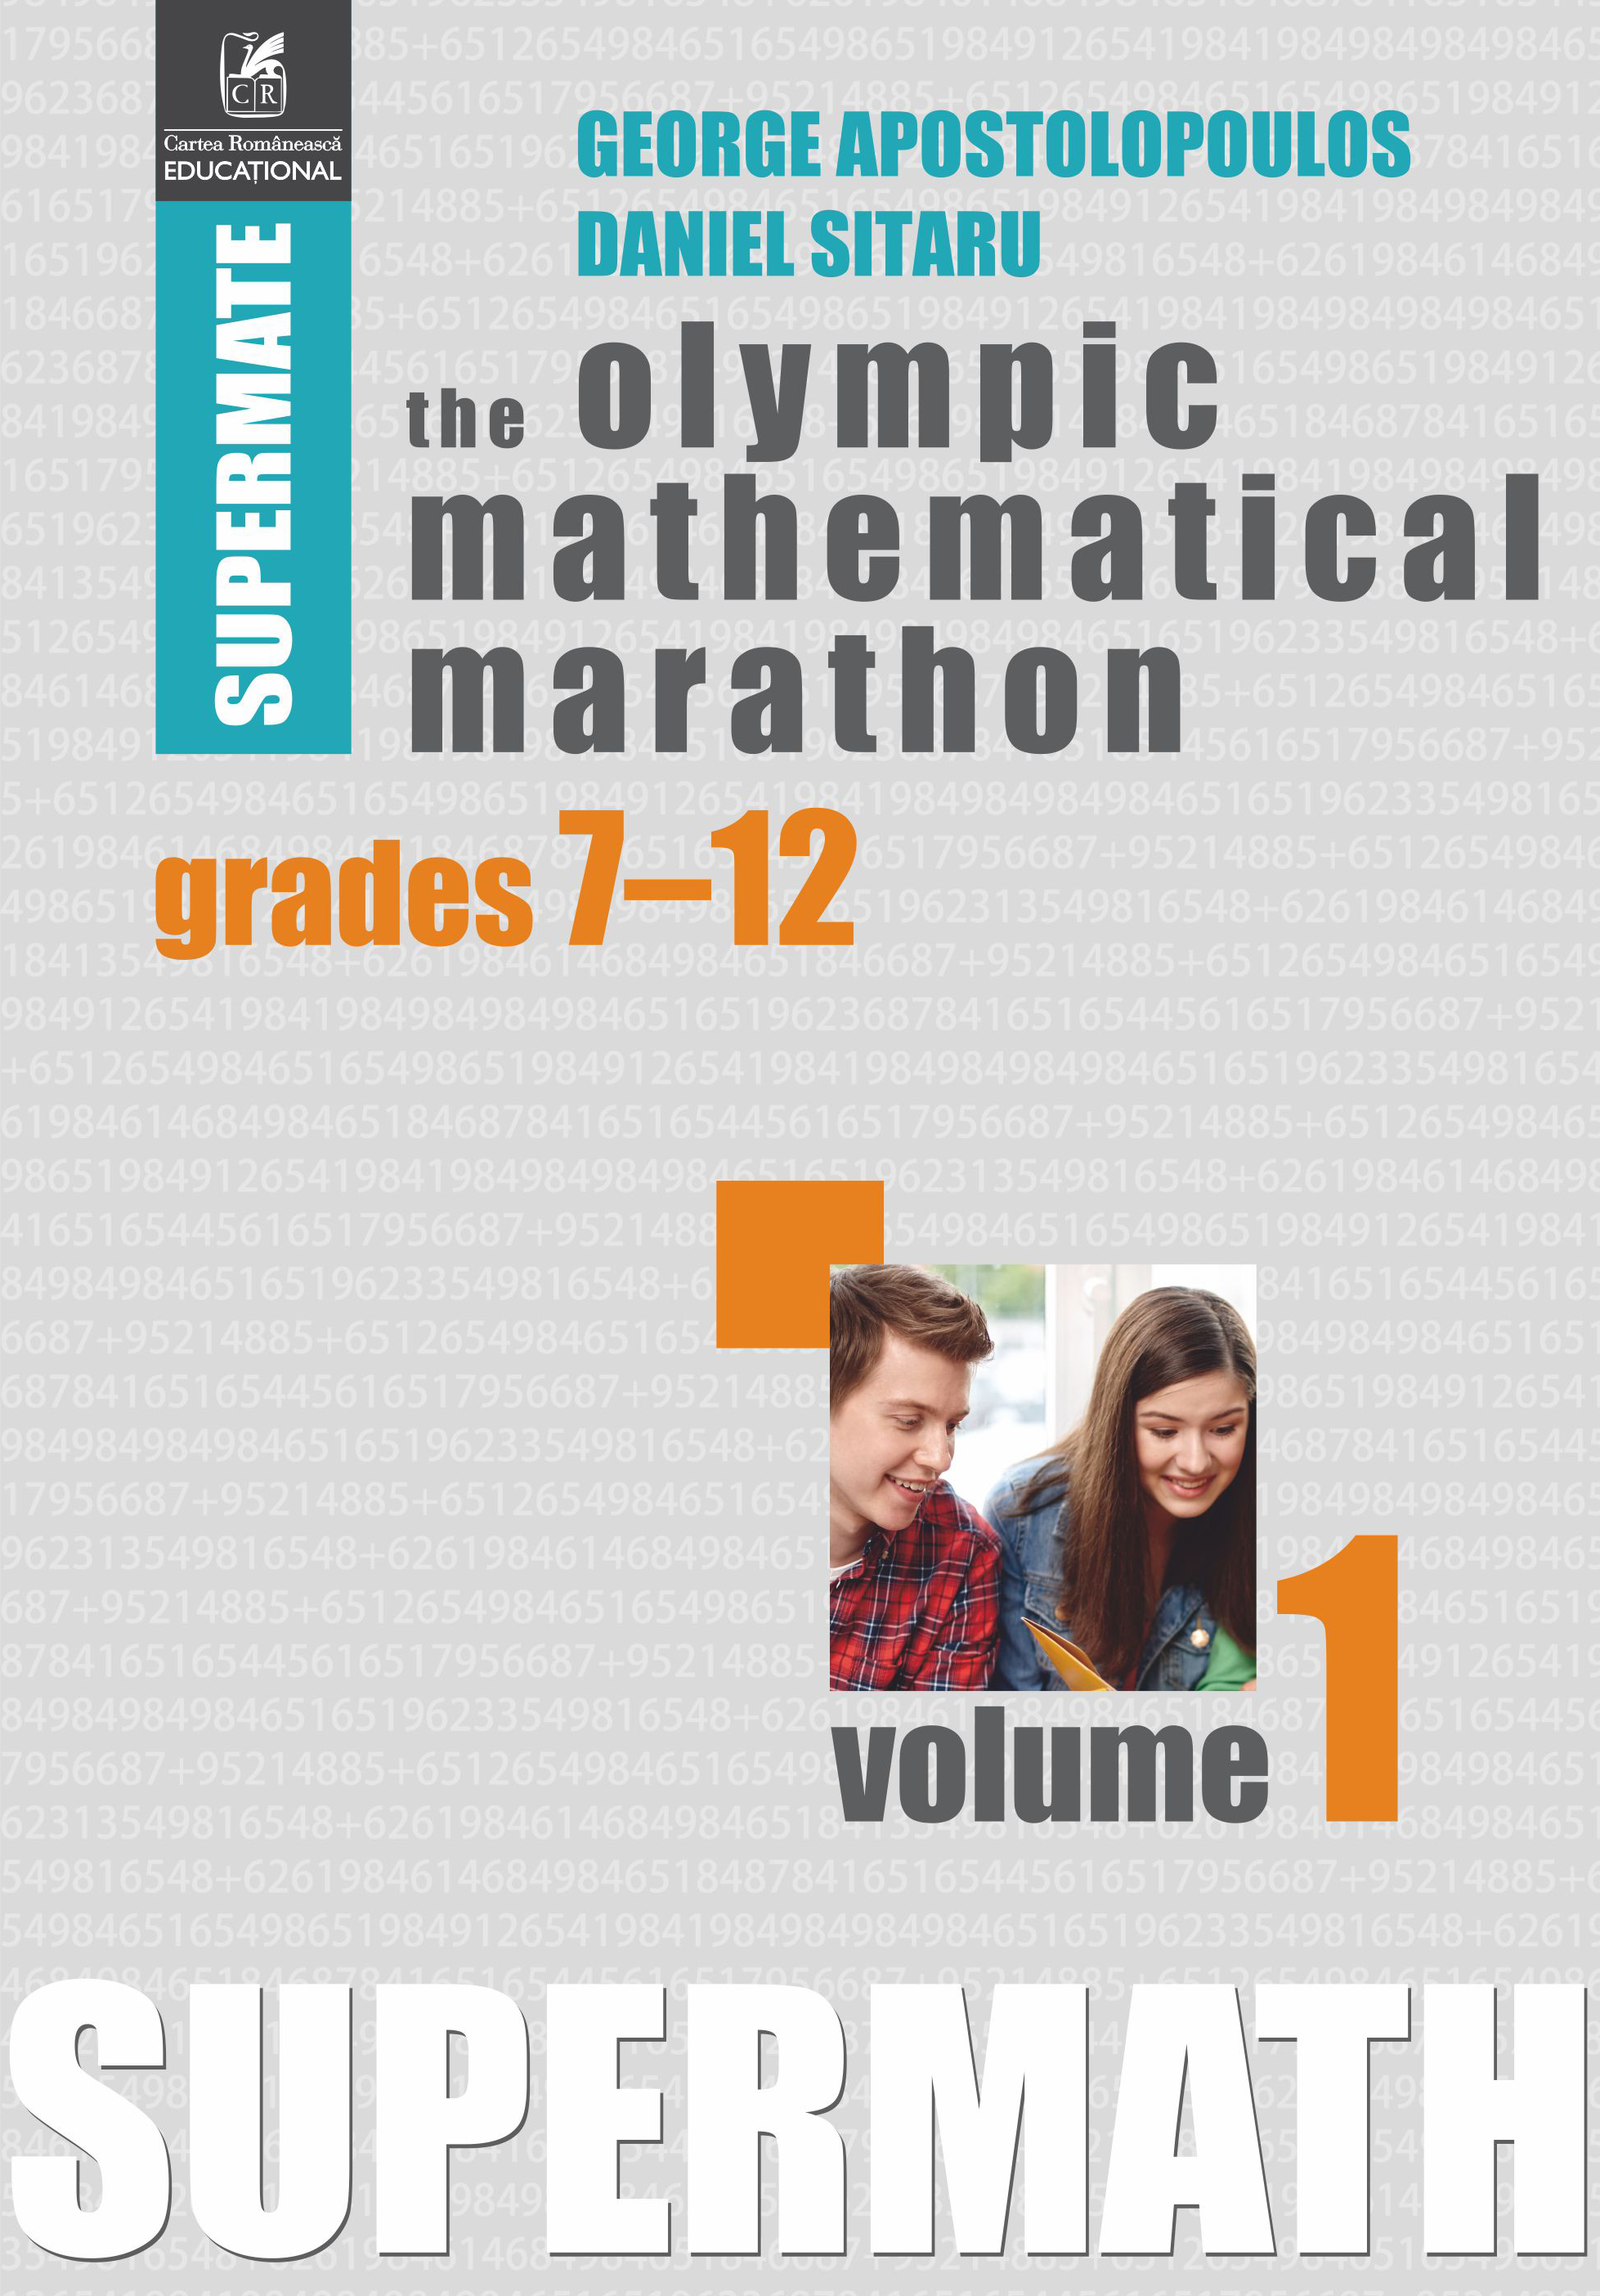 The Olympic Mathematical Marathon Grades 7-12 Vol.1 - George Apostolopoulos